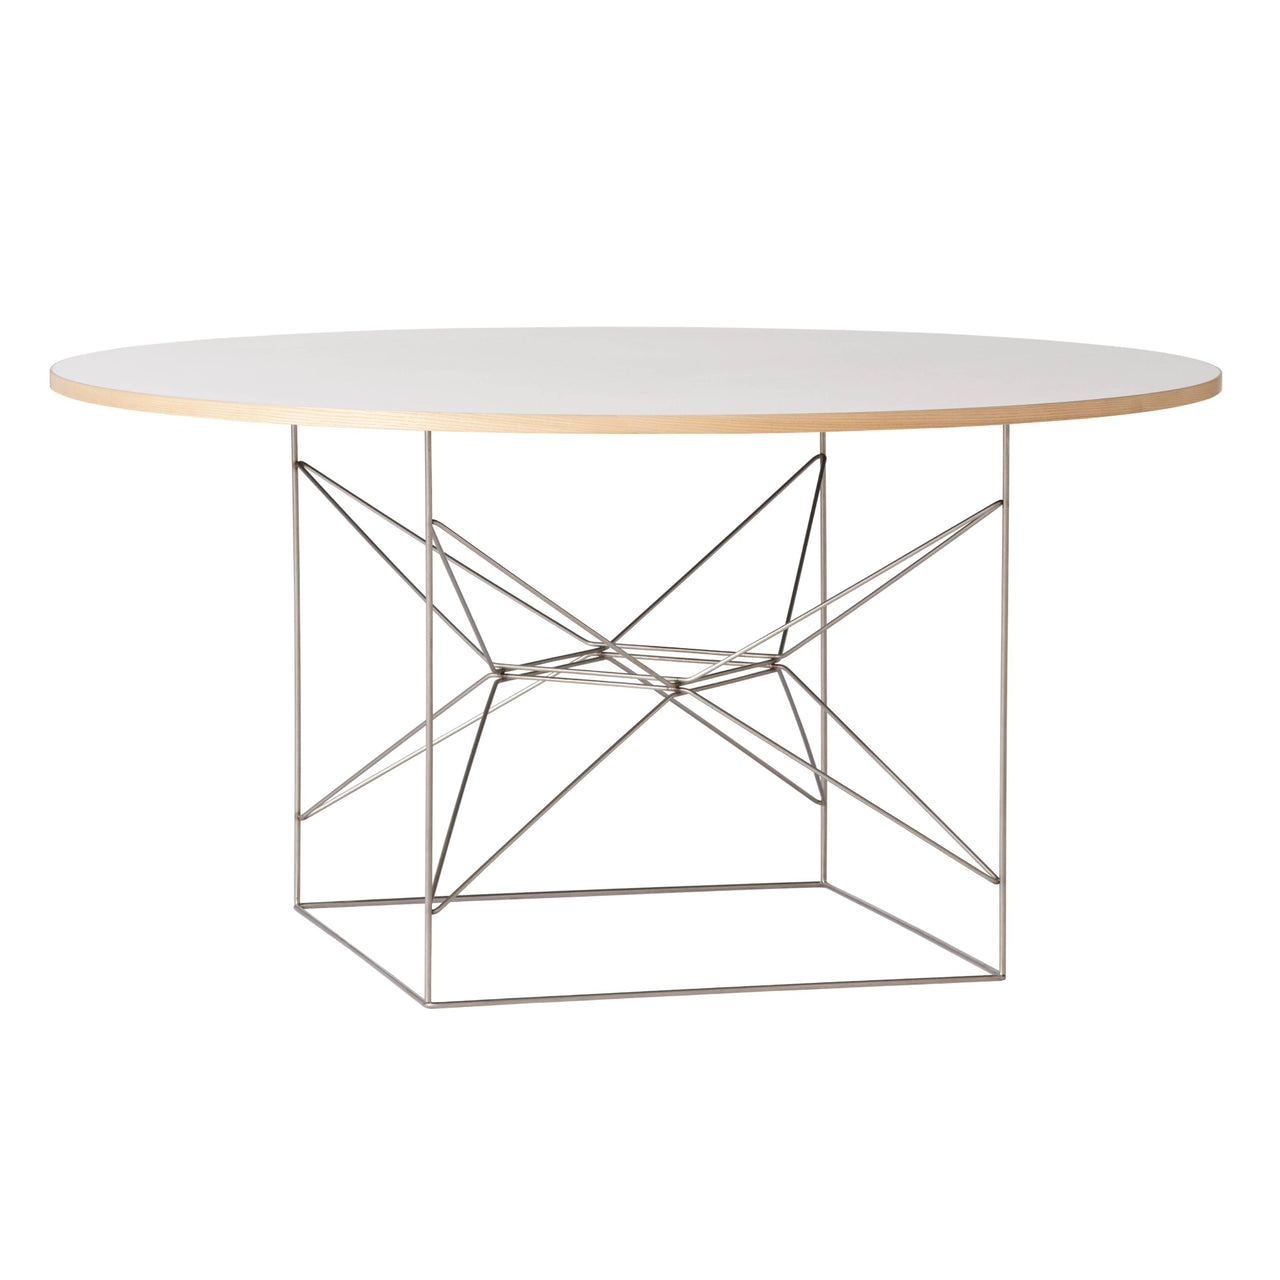 Ole Schjøll Dining Table: White Laminate